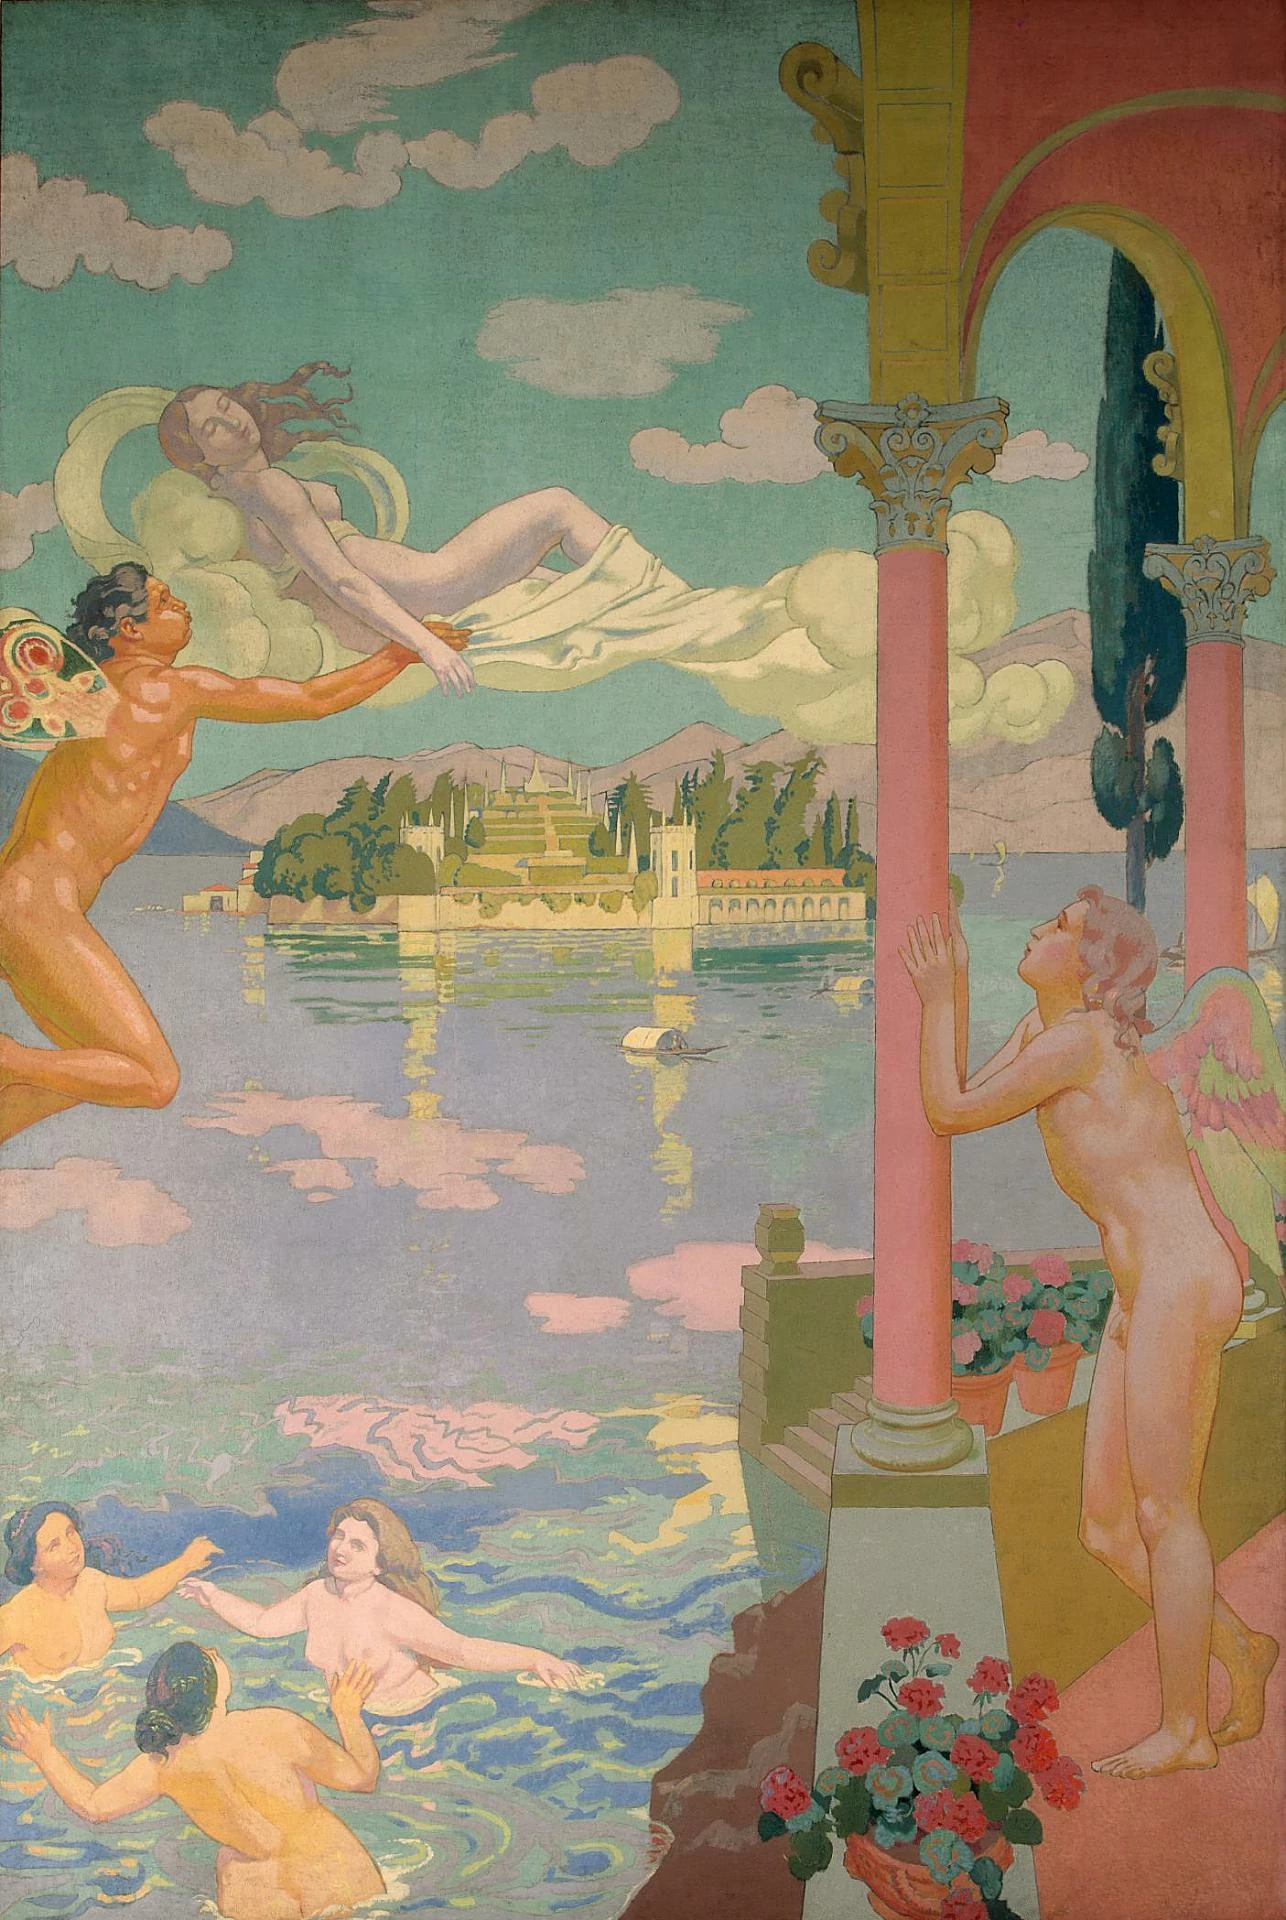 Psyche Panel 2 — Zephyr Transporting Psyche to the Island of Delight, Maurice Denis